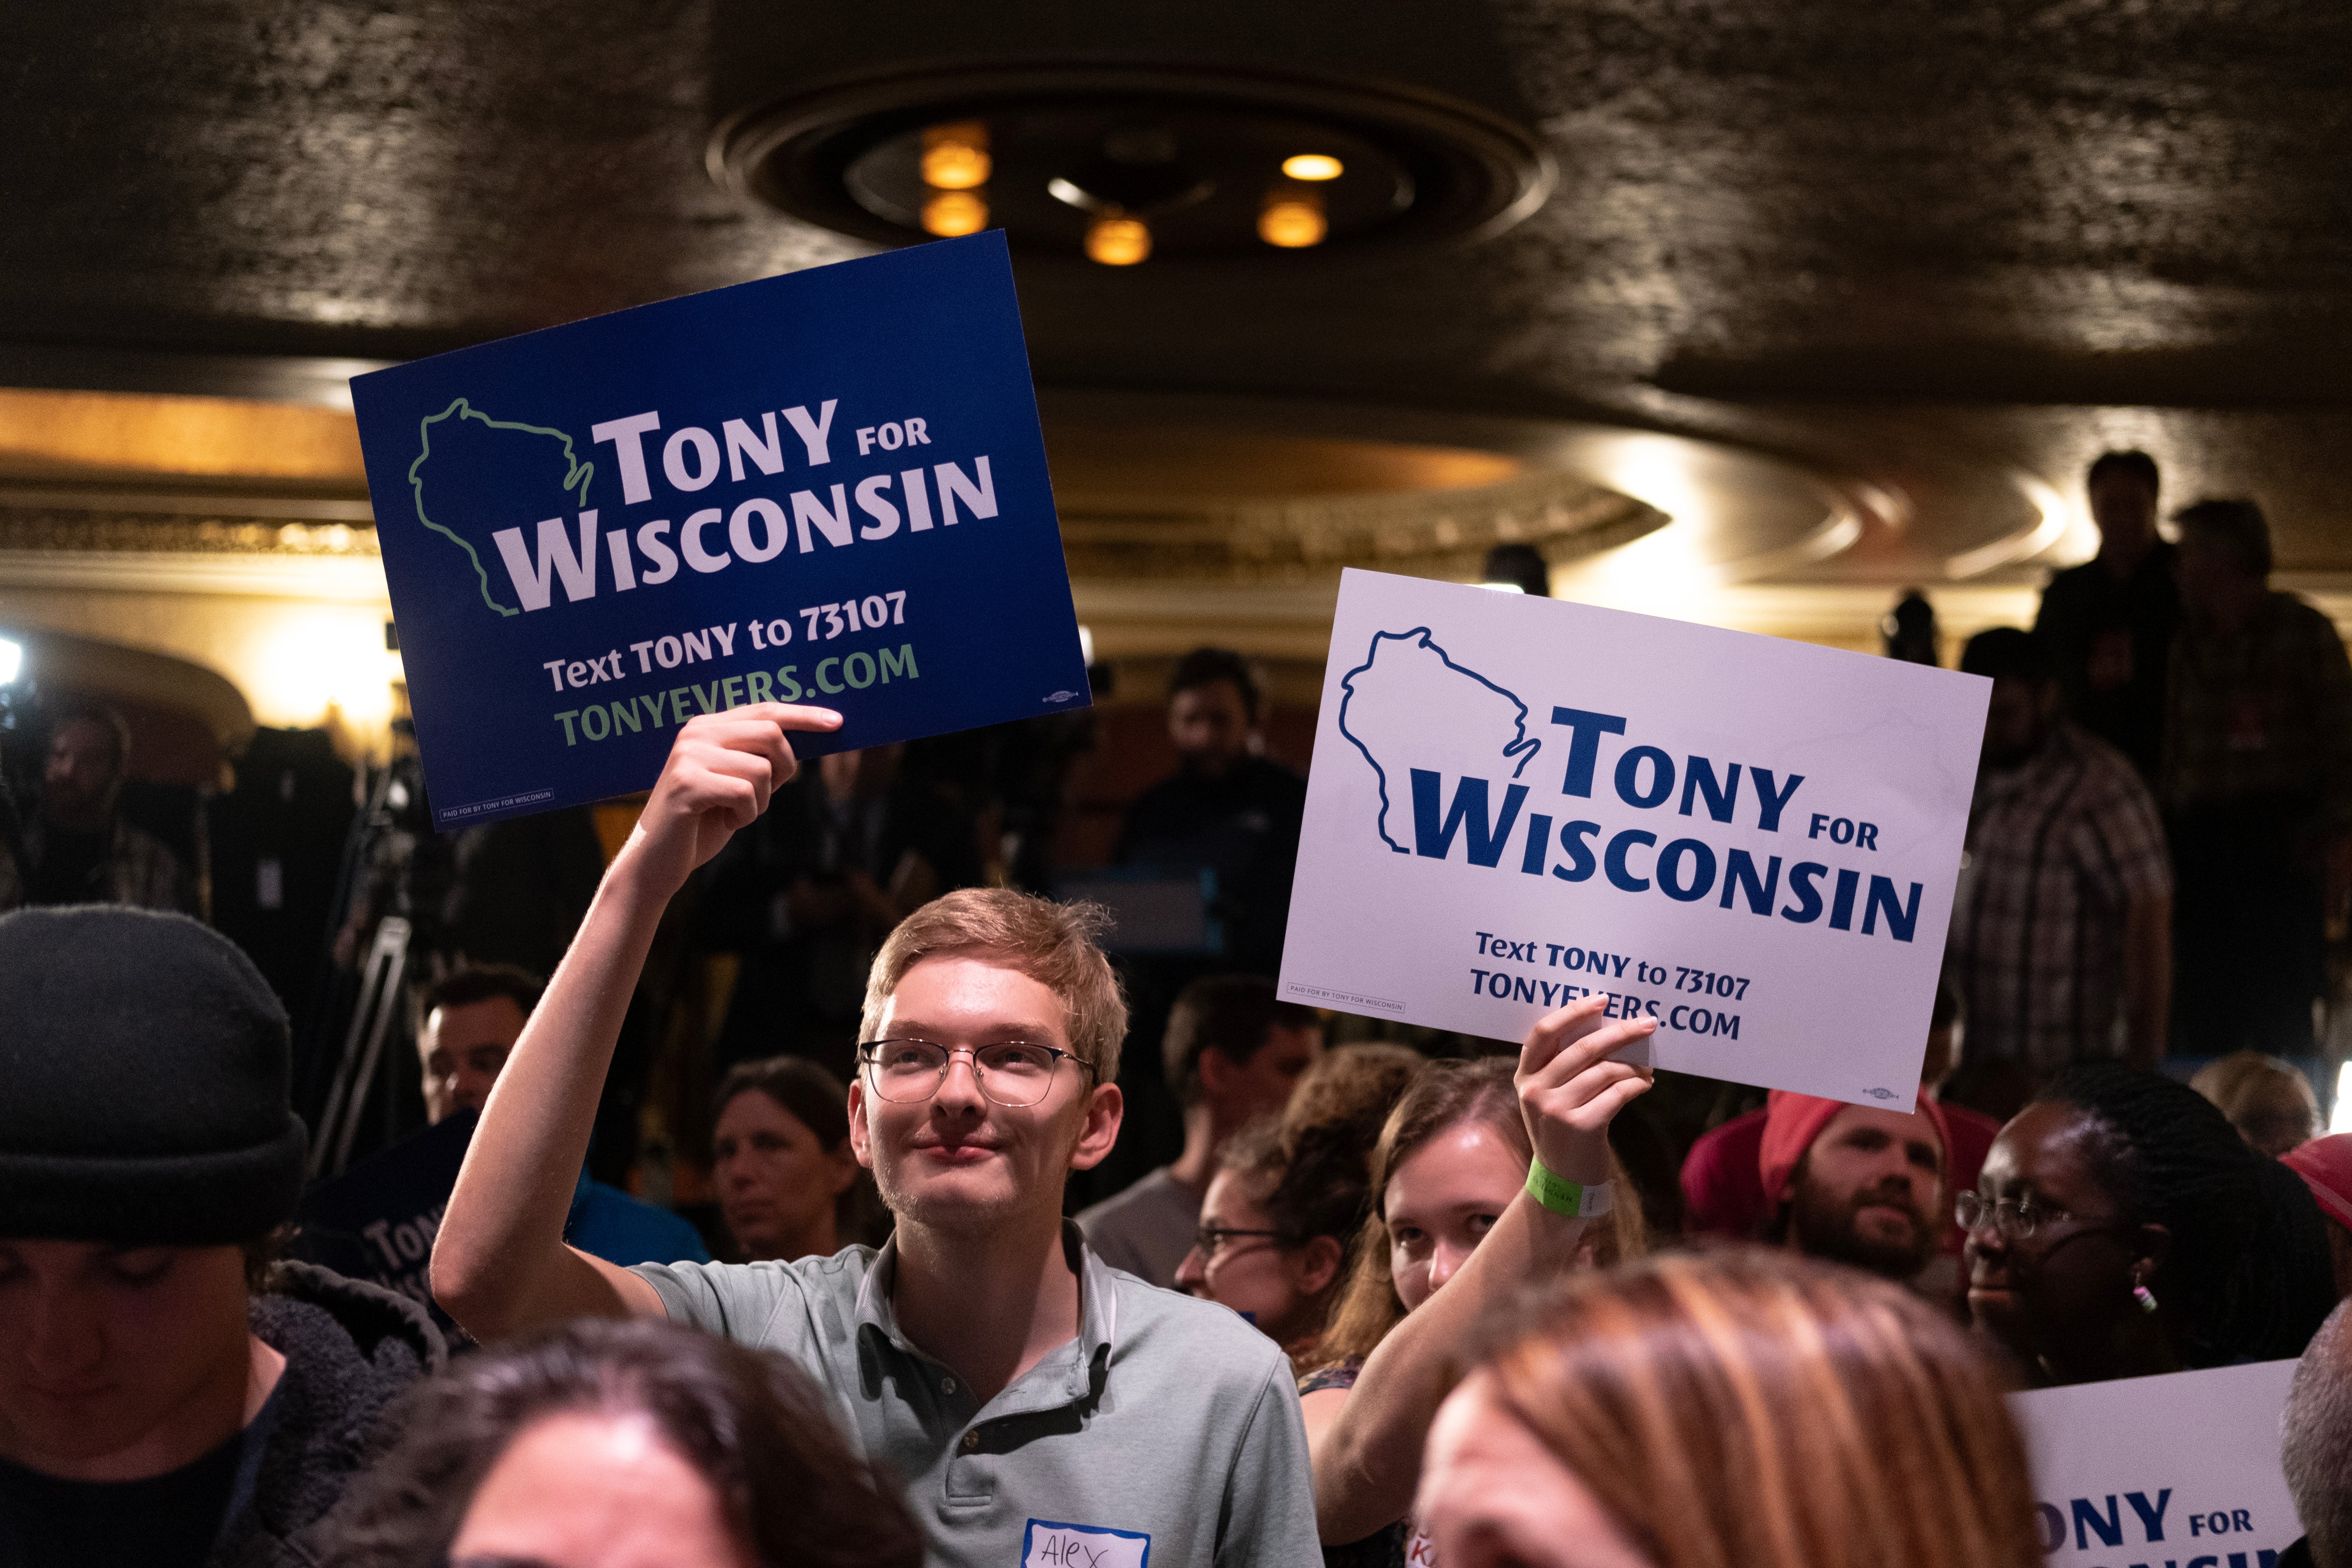 Supporters react during an election night event for Governor Tony Evers at The Orpheum Theater on November 8, 2022 in Madison, Wisconsin